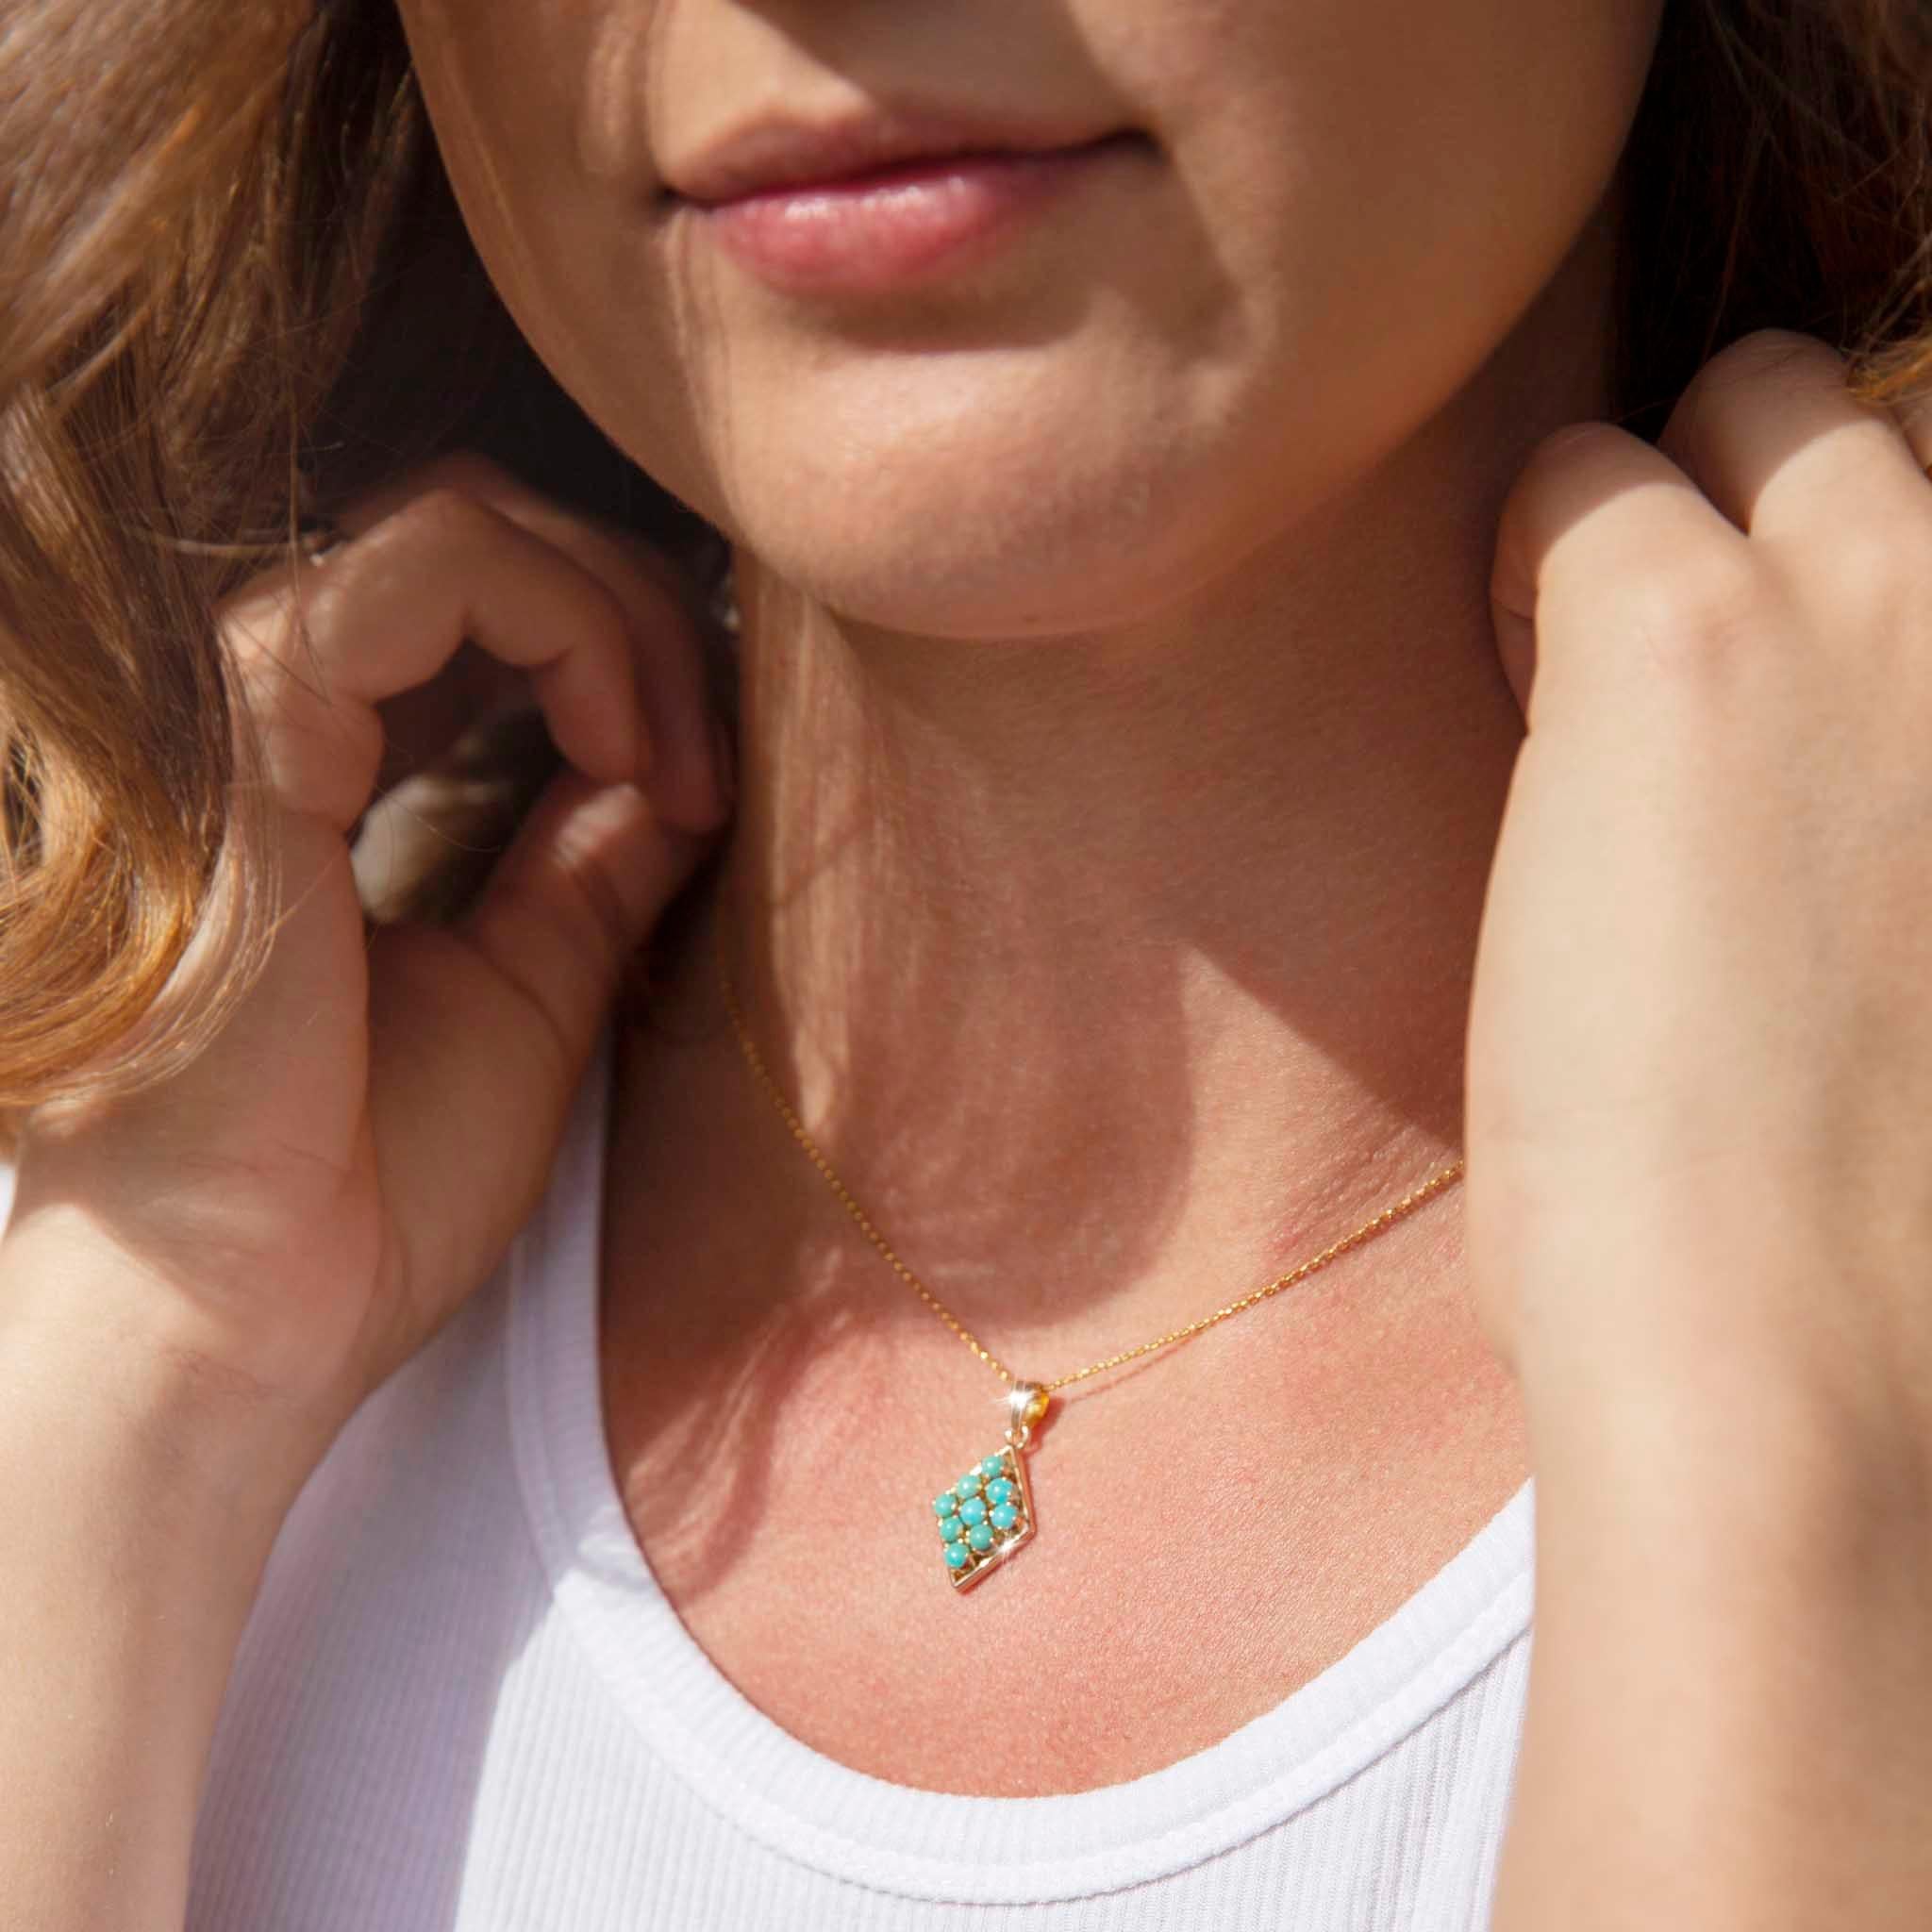 Forged in 14 carat yellow gold, this charming vintage pendant features an elegant diamond-shaped setting holding nine round blue turquoise. The pendant is threaded on a fine 9 carat gold chain. We have named this darling pendant The Nuri Pendant and